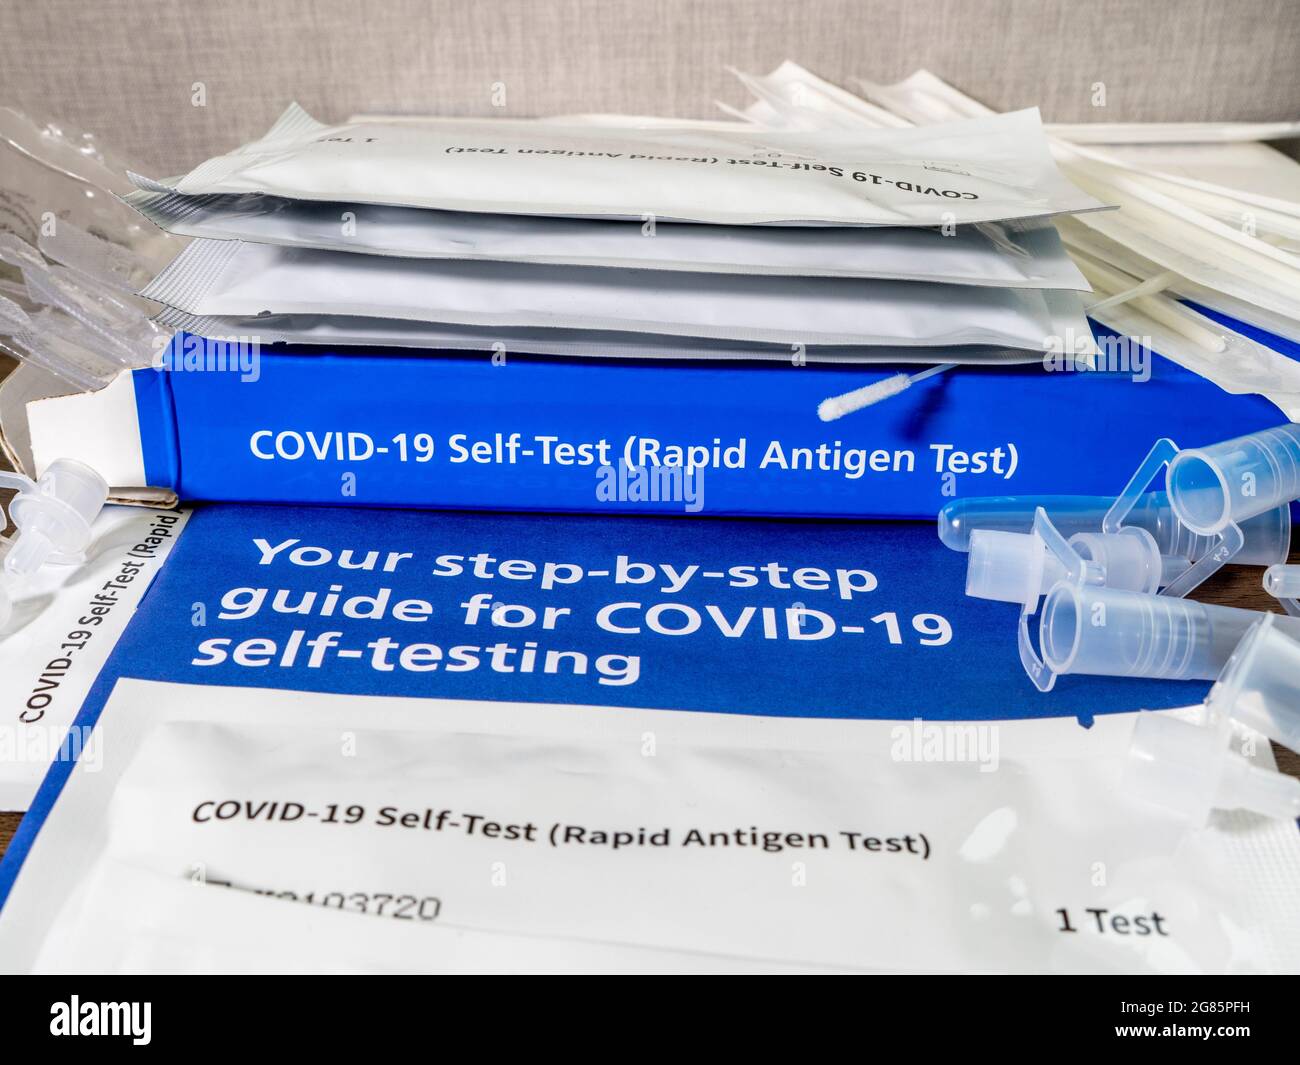 Closeup POV shot of an unbranded Covid-19 rapid antigen, self-test kit, with contents and user guide laid out. Stock Photo